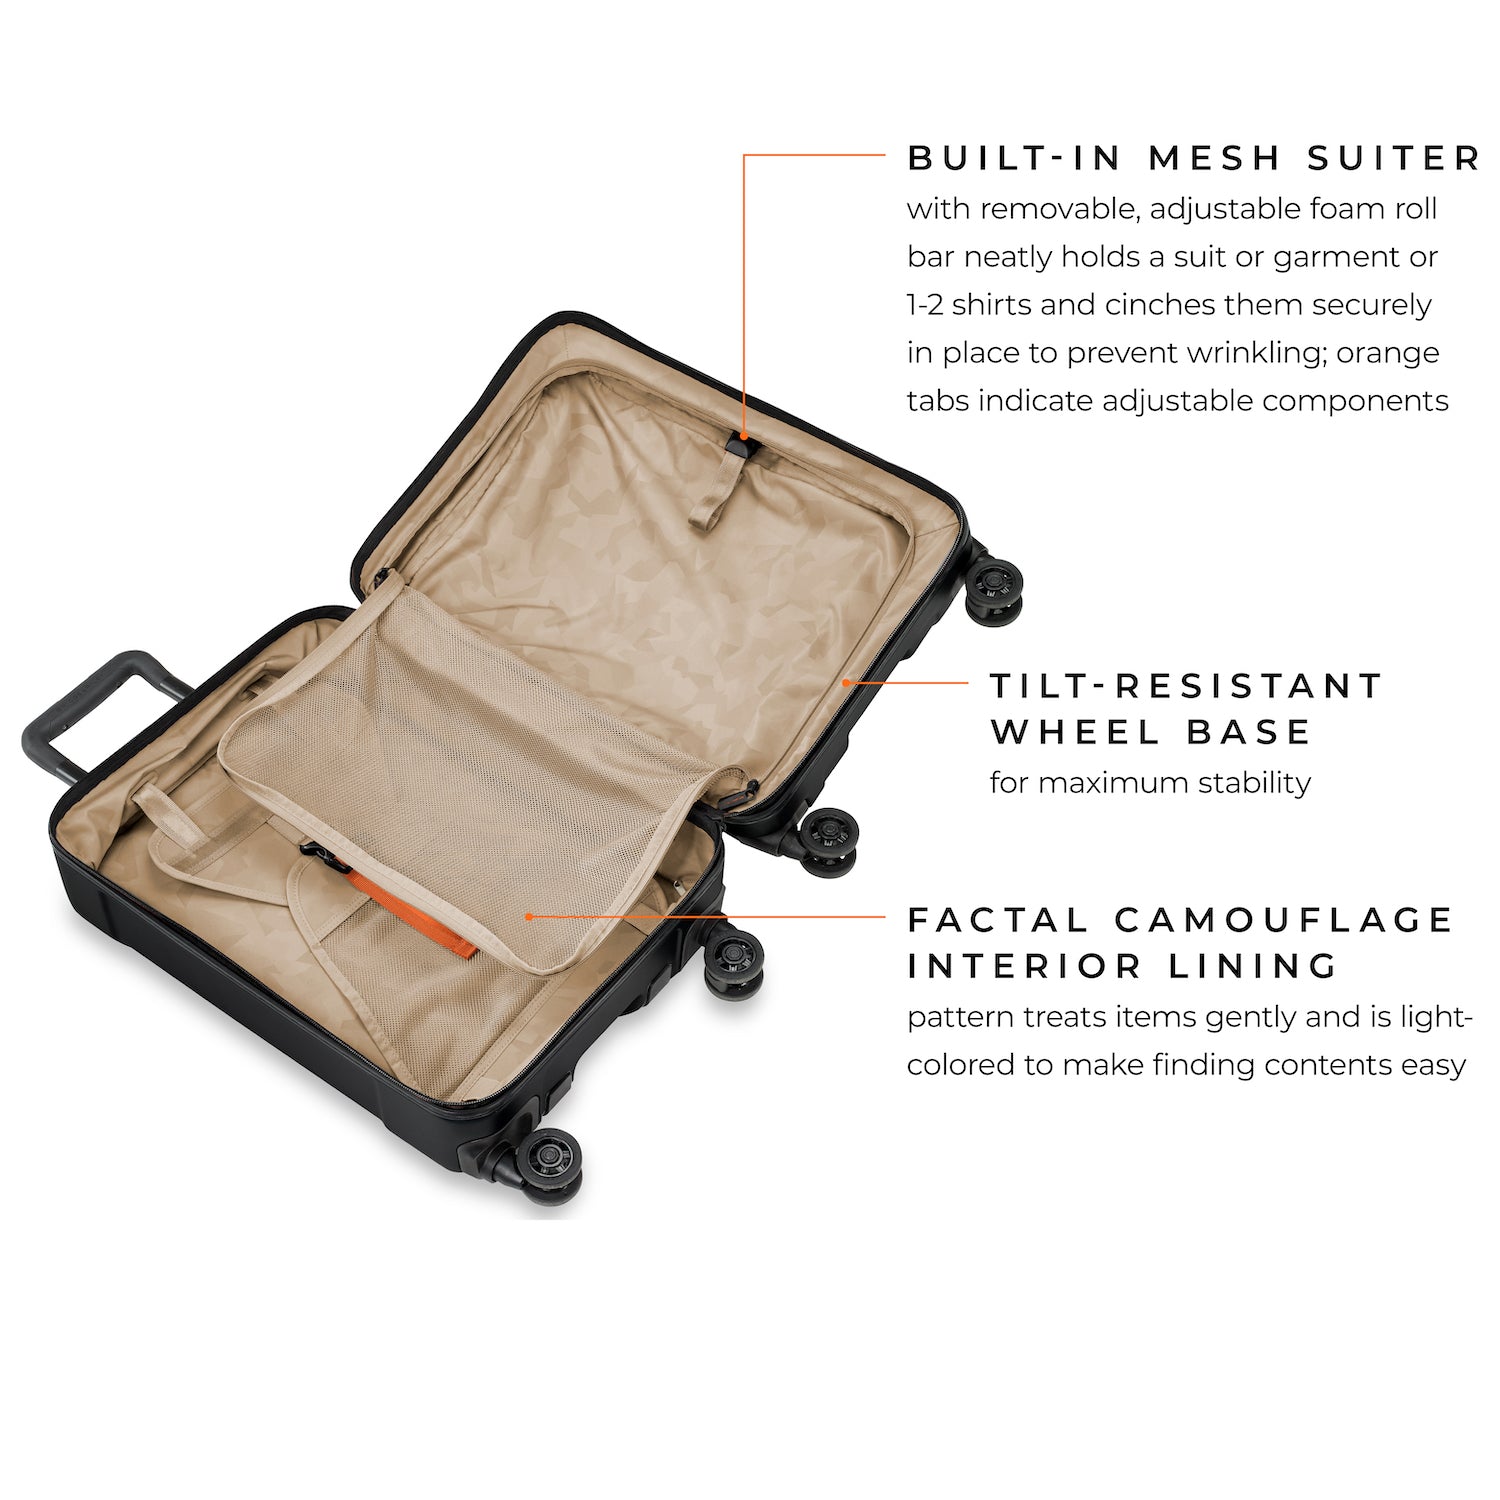 briggs & riley torq black international 21" carry-on spinner built-in mesh suiter with removable, adjustable foam roll bar neatly holds a suit or garment or 1-2 shirts and cinches them securely in place to prevent wrinkling; orange tabs indicate adjustable components, tilt-resistant wheel base for maximum stability, factal camouflage interior lining pattern treats items gently and is light-colored to make finding contents easy  #color_stealth